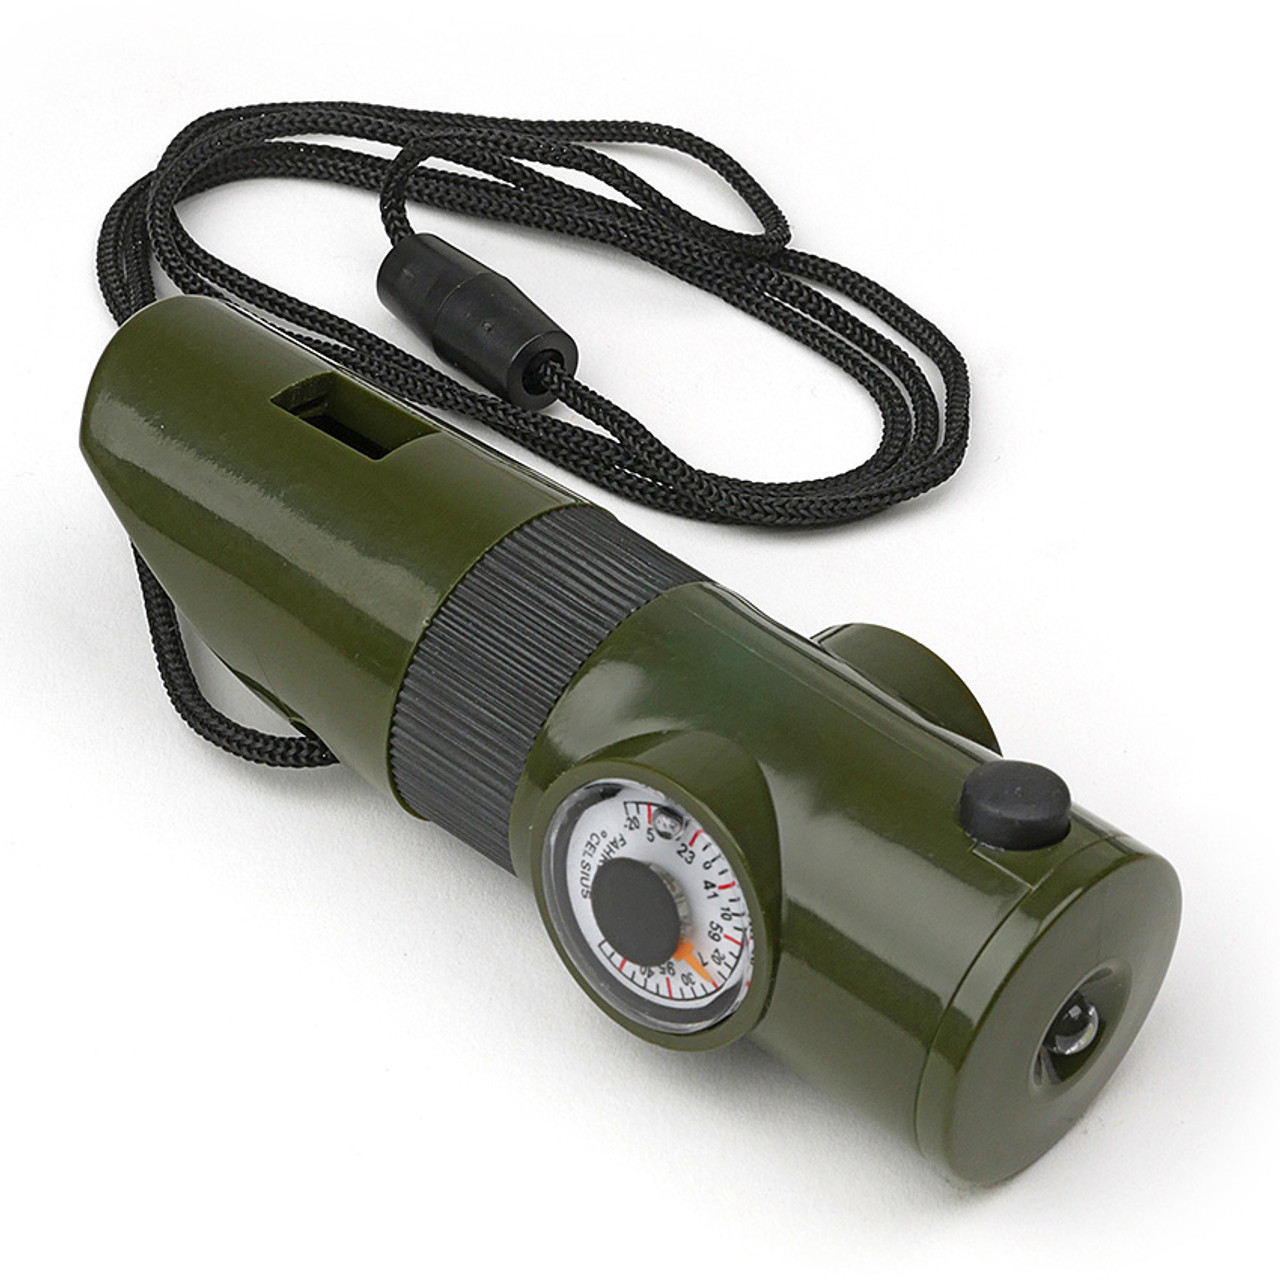 3 in1 Emergency Survival Gear Camping Hiking Whistle Compass